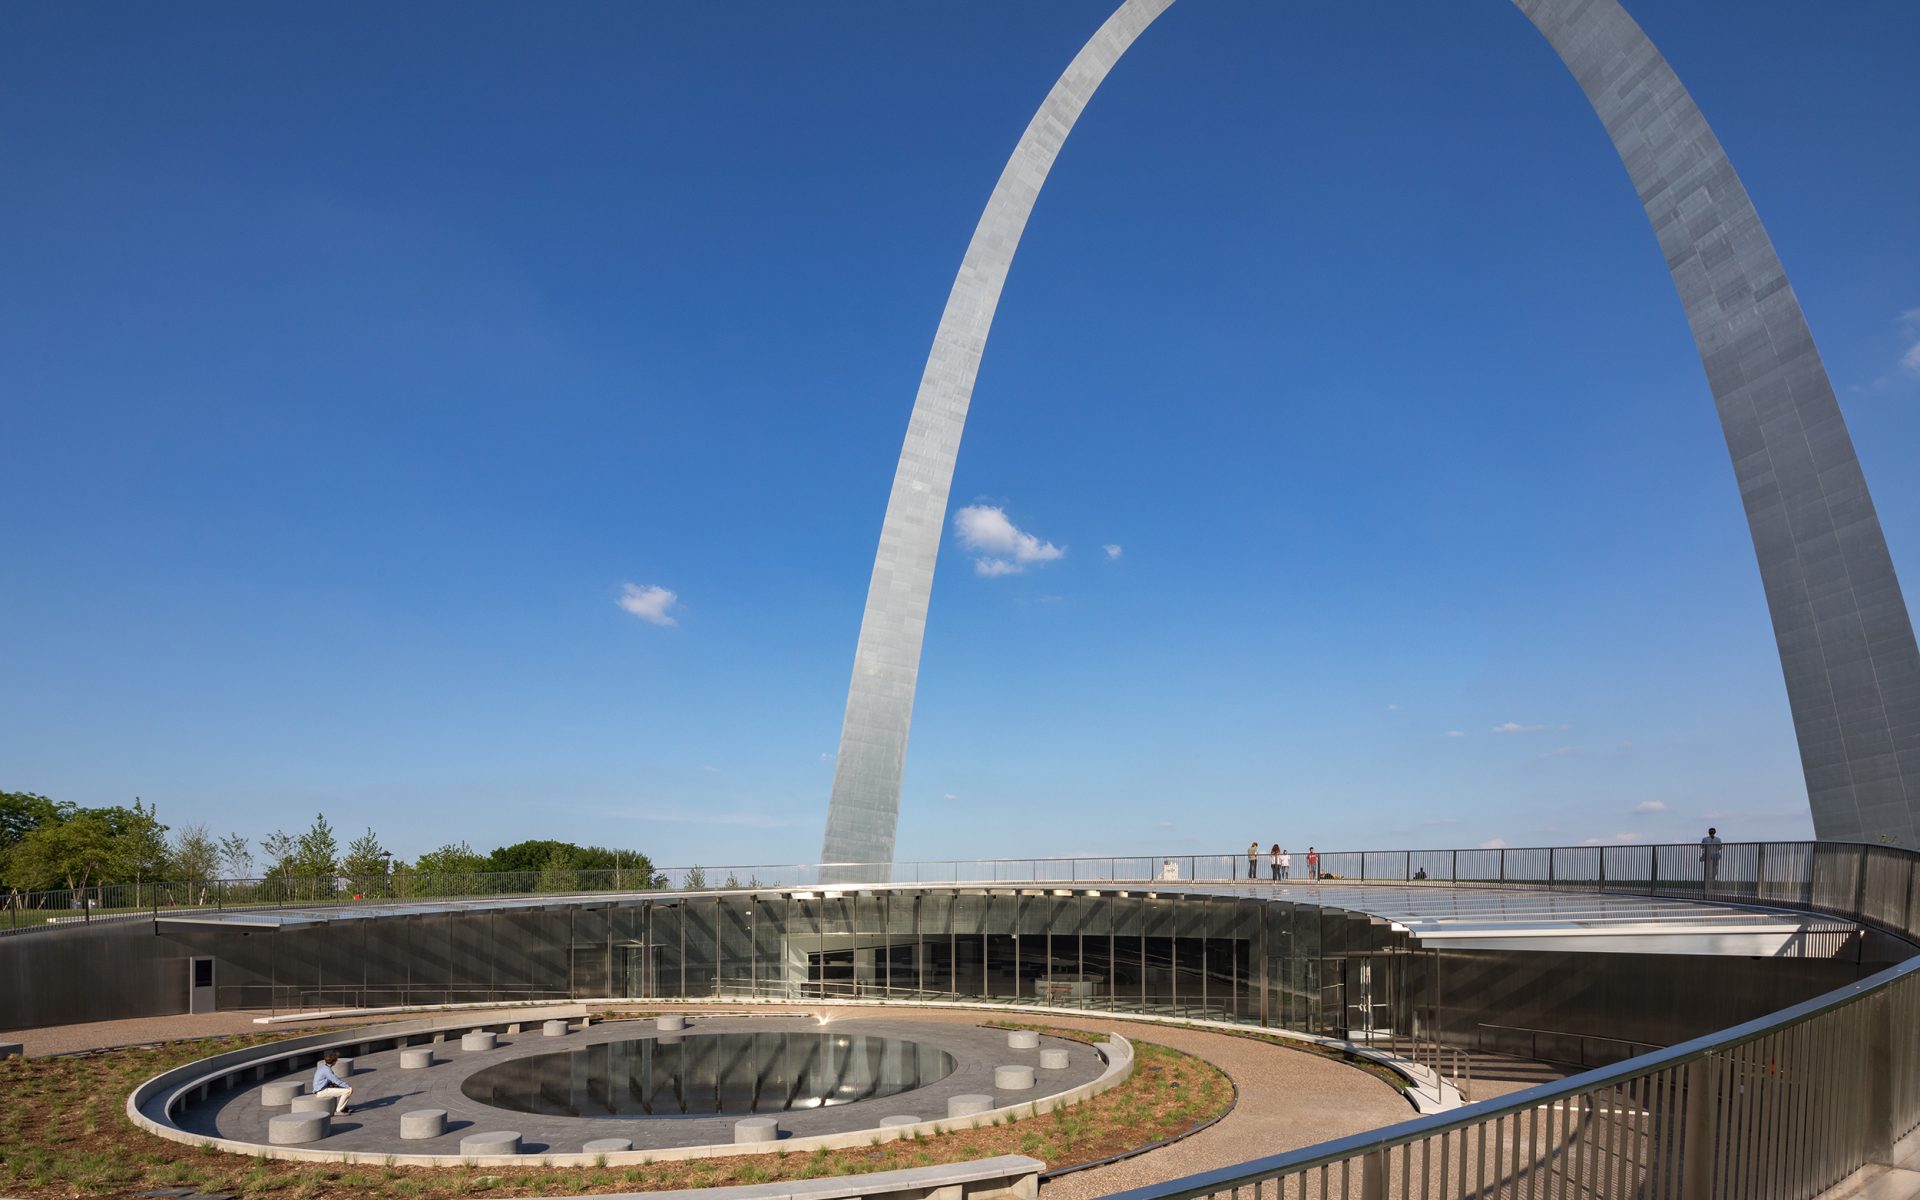 After $380-Million Renovation, the St. Louis Arch Reopens - Galerie